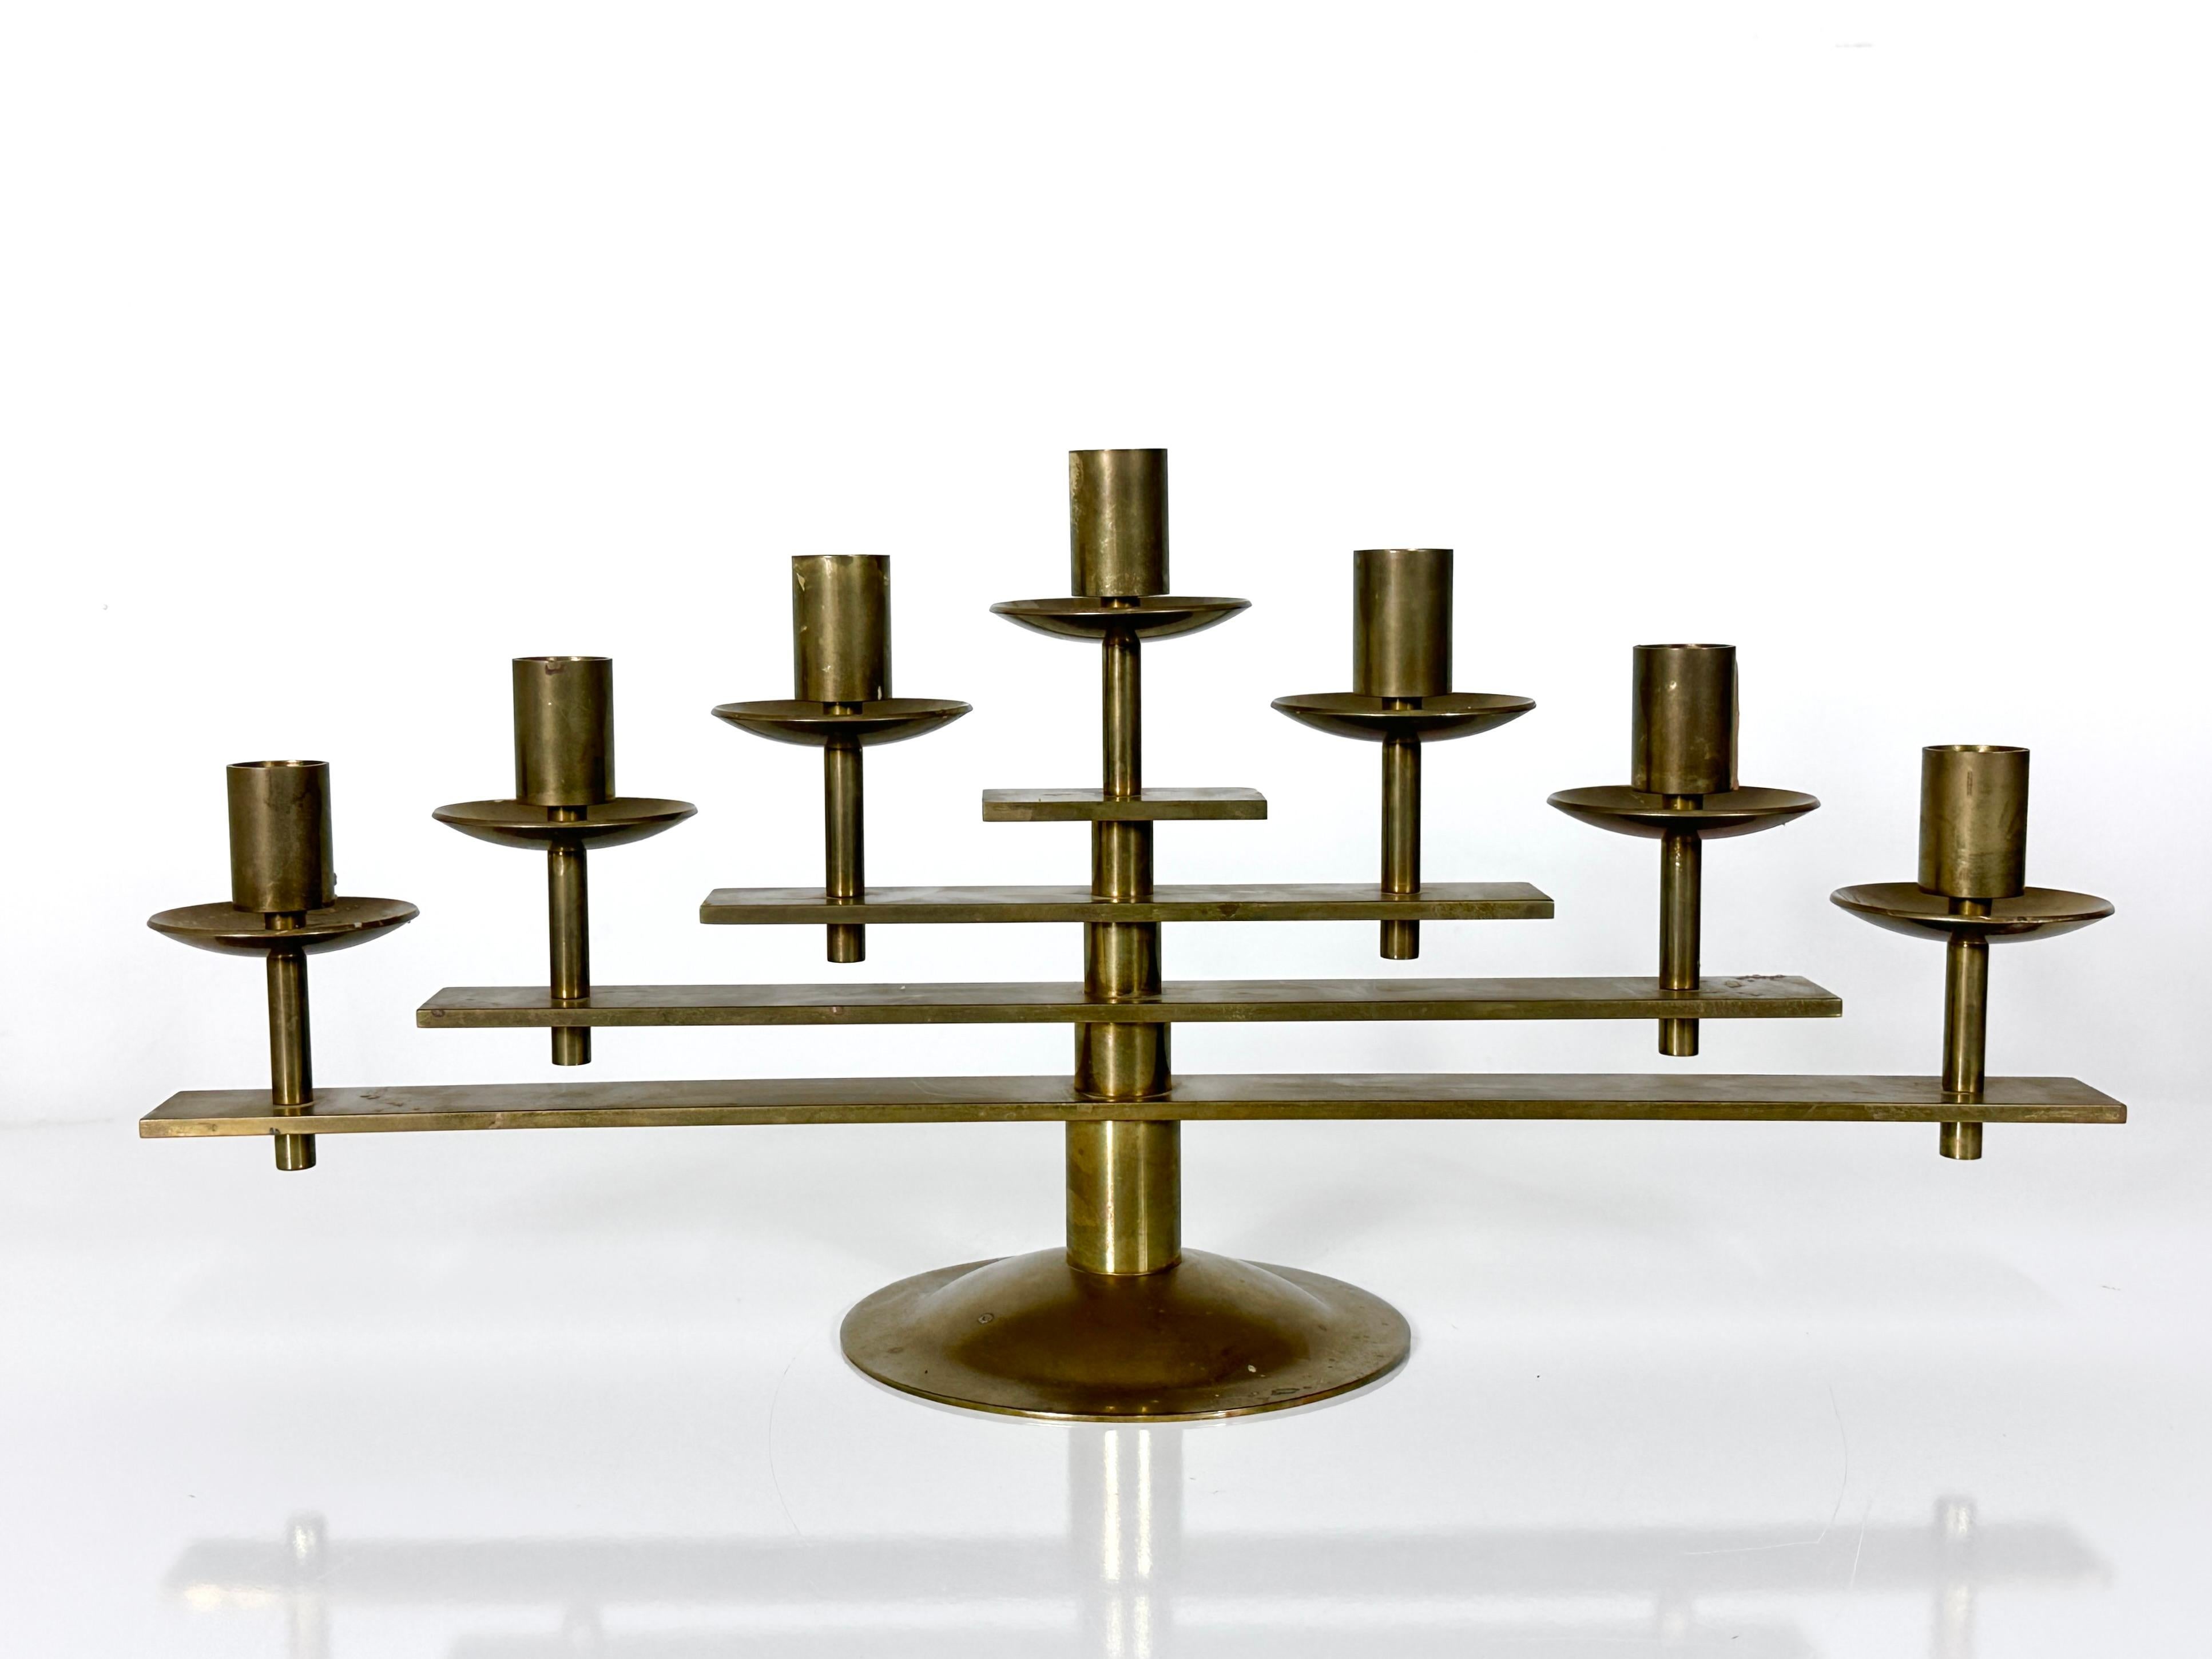 Solid brass 7 arm articulated candelabra designed and made in Denmark circa 1960s

Architectural yet elegant design with adjustable arms to create various configurations

Original label intact to underside